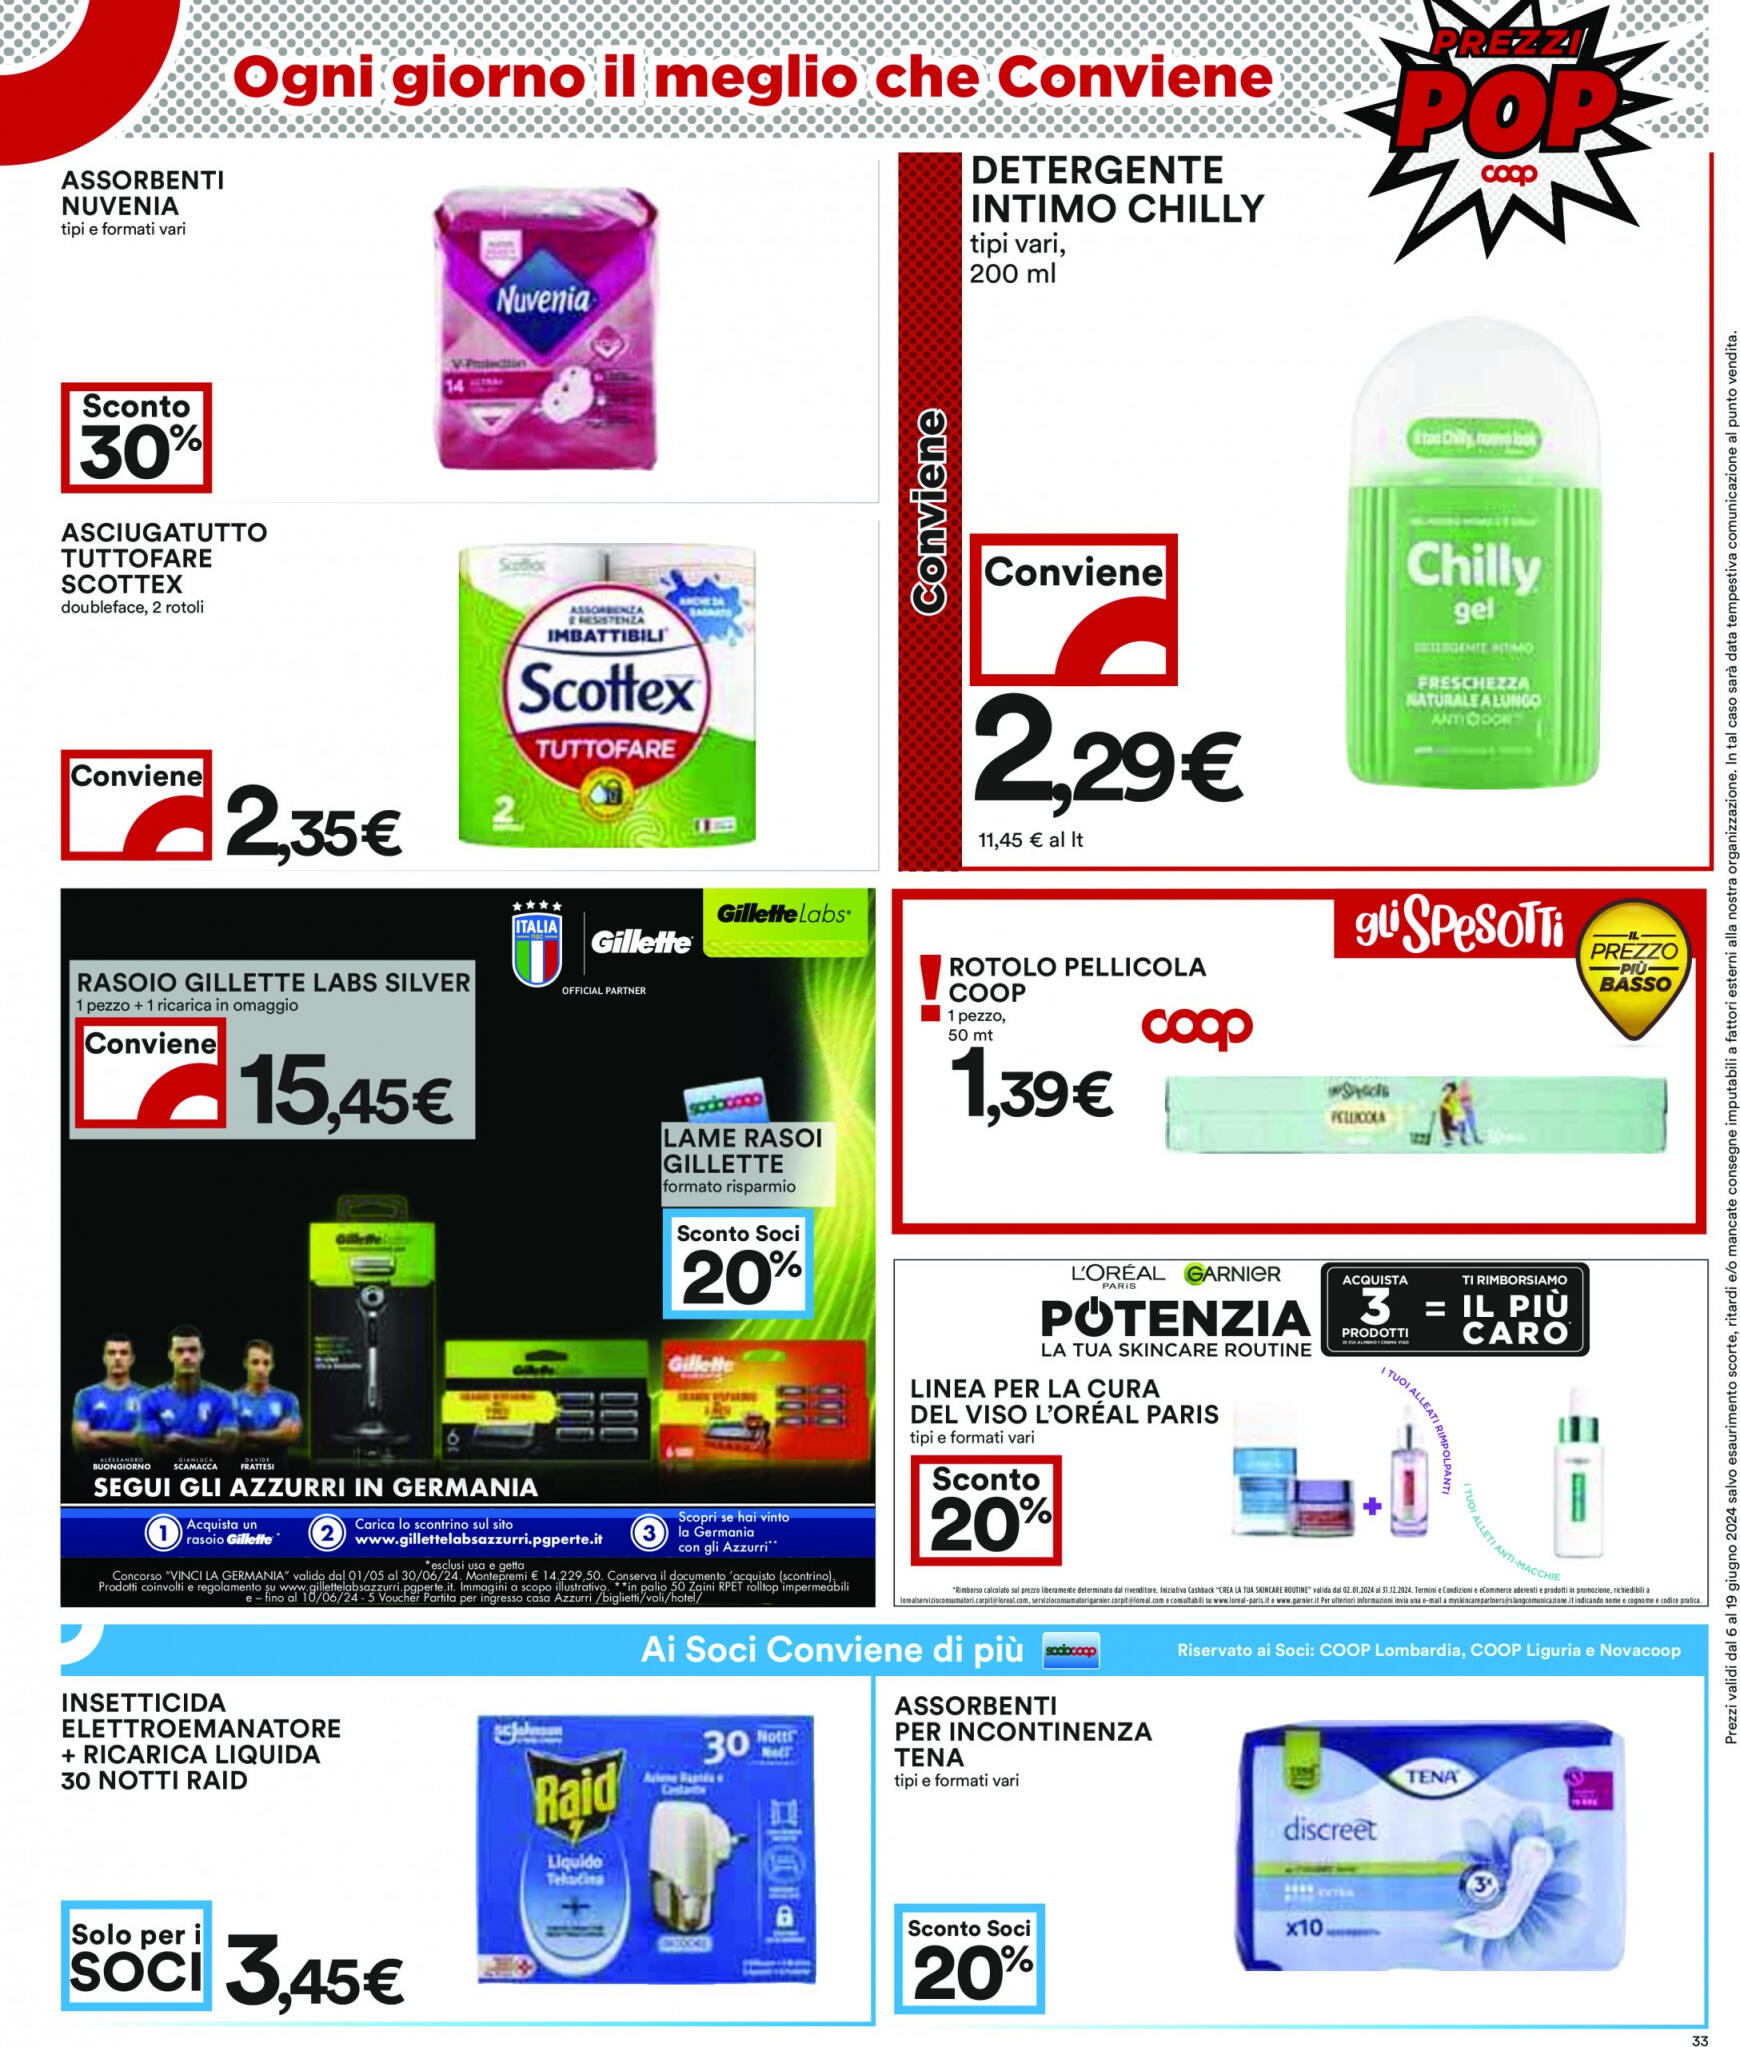 coop - Nuovo volantino Coop 10.06. - 19.06. - page: 33